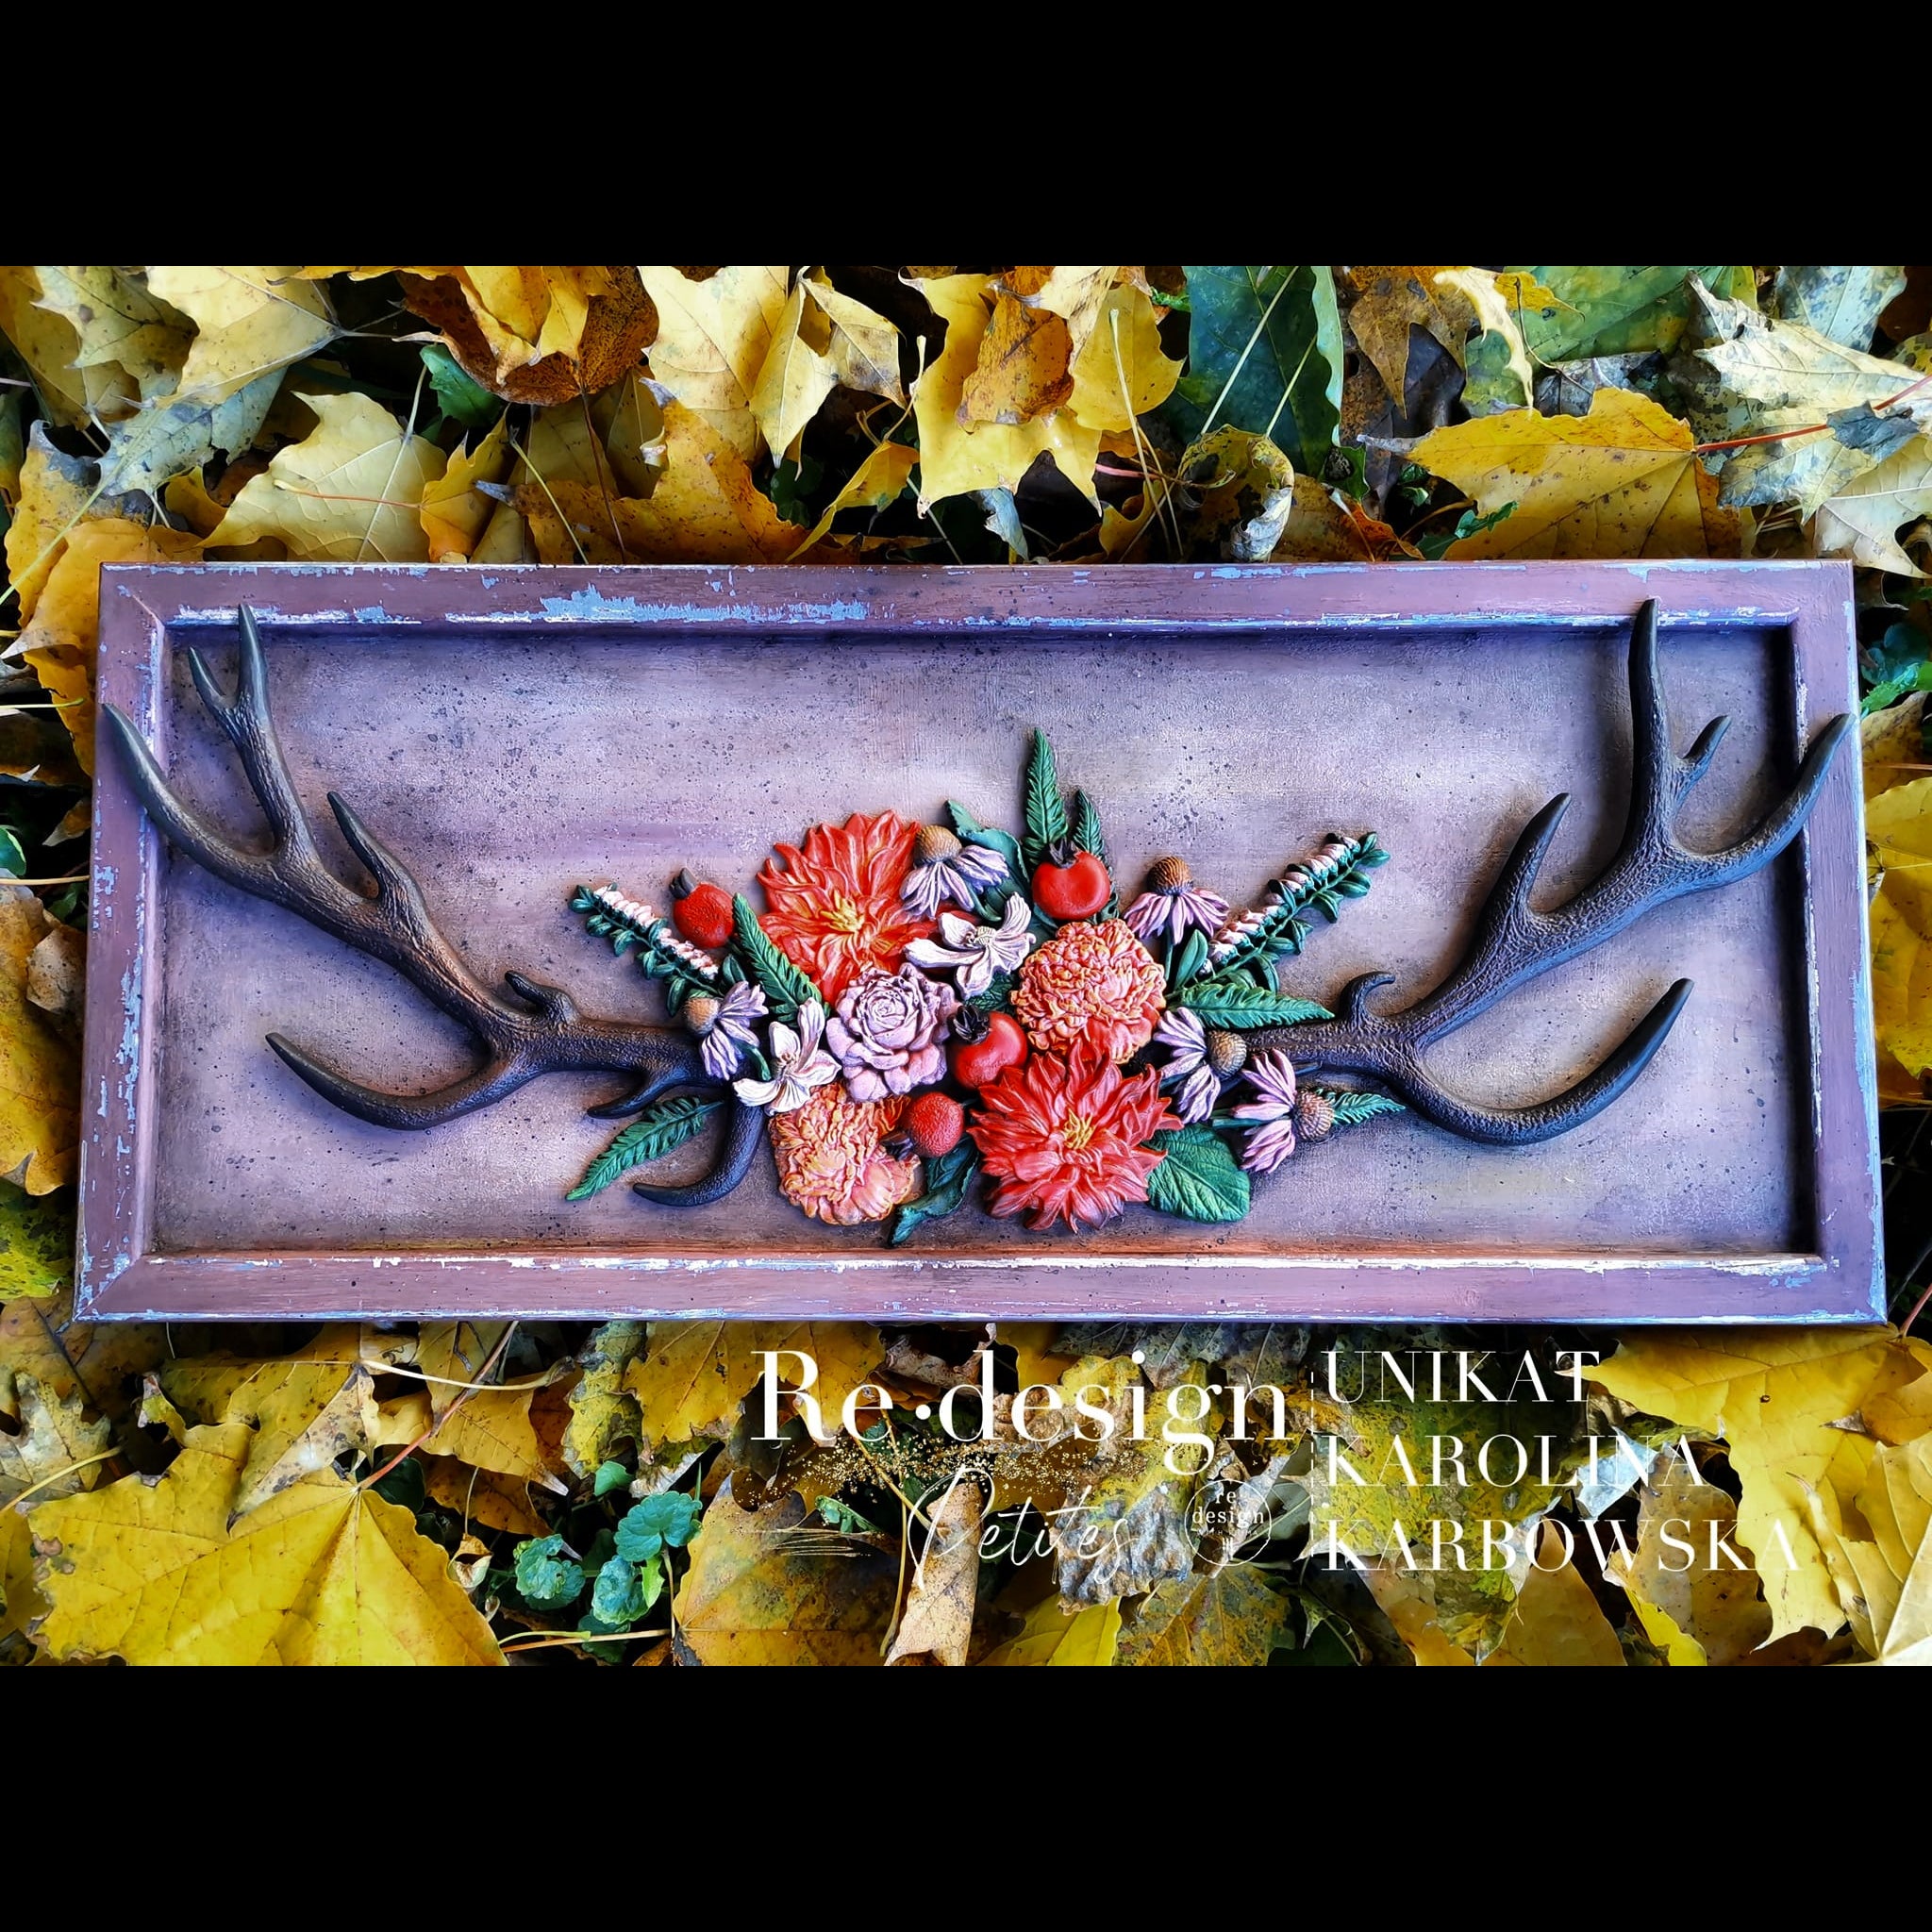 A rectangular wood frame created by Unikat Karolina Karbowska features ReDesign with Prima's Logger's Lodge silicone moulds on it. The antlers are painted dark brown and the flowers are colorfully painted. Black borders are on the top and bottom of the photo.